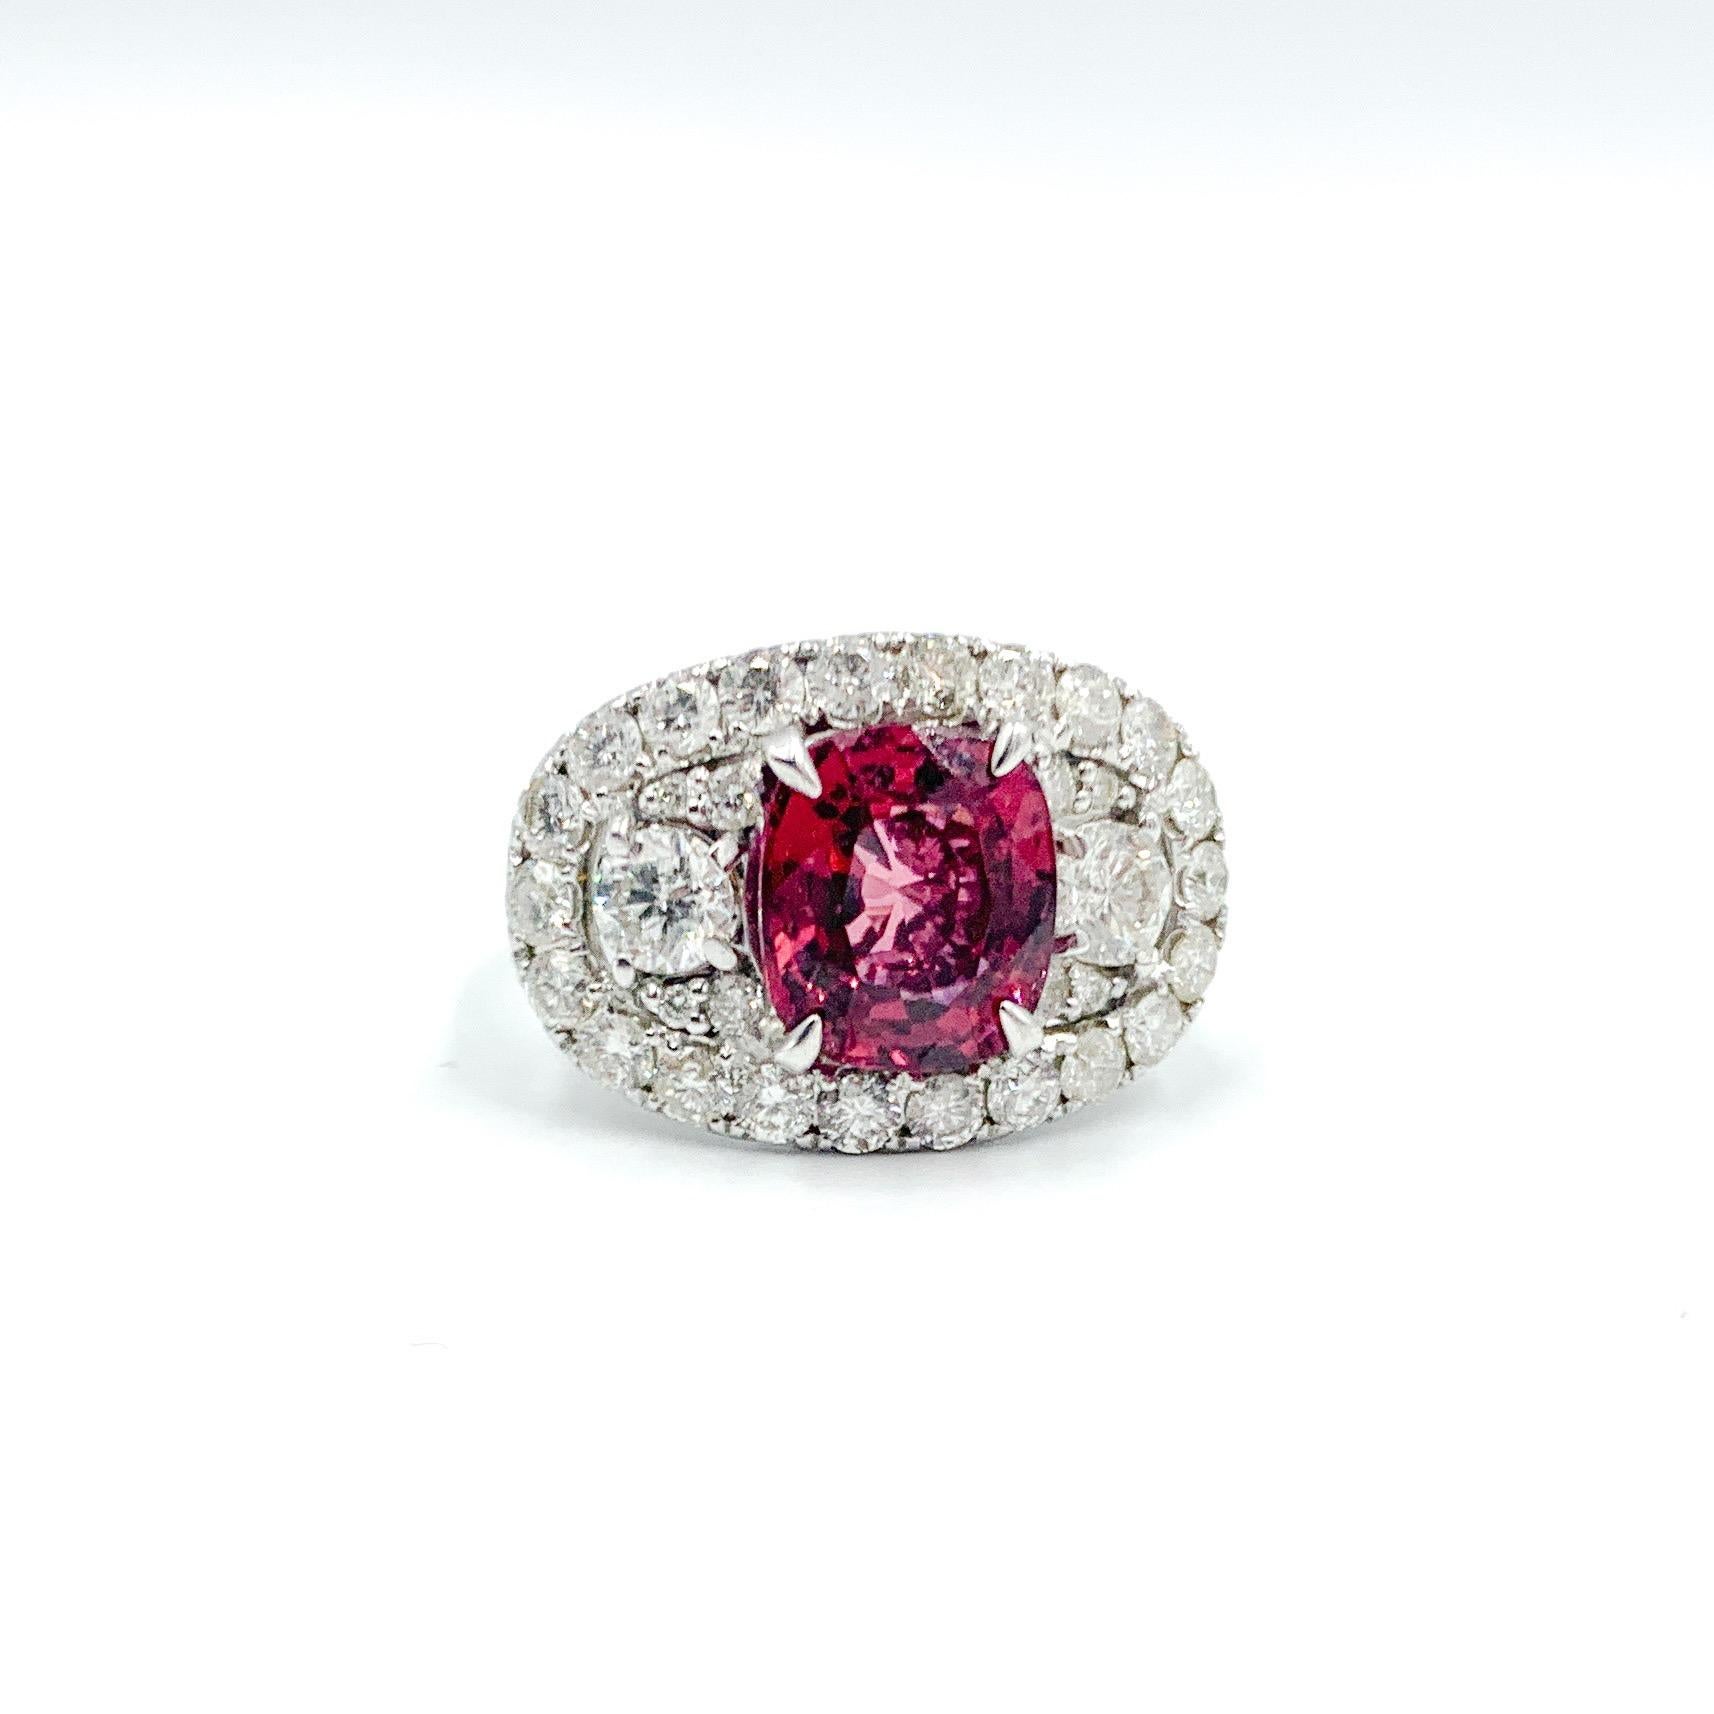 According to GIA, spinel is a good candidate for the title of “History’s Most Underappreciated Gem.” In fact, for many years red spinel was mistakenly identified as ruby. You know the enormous 